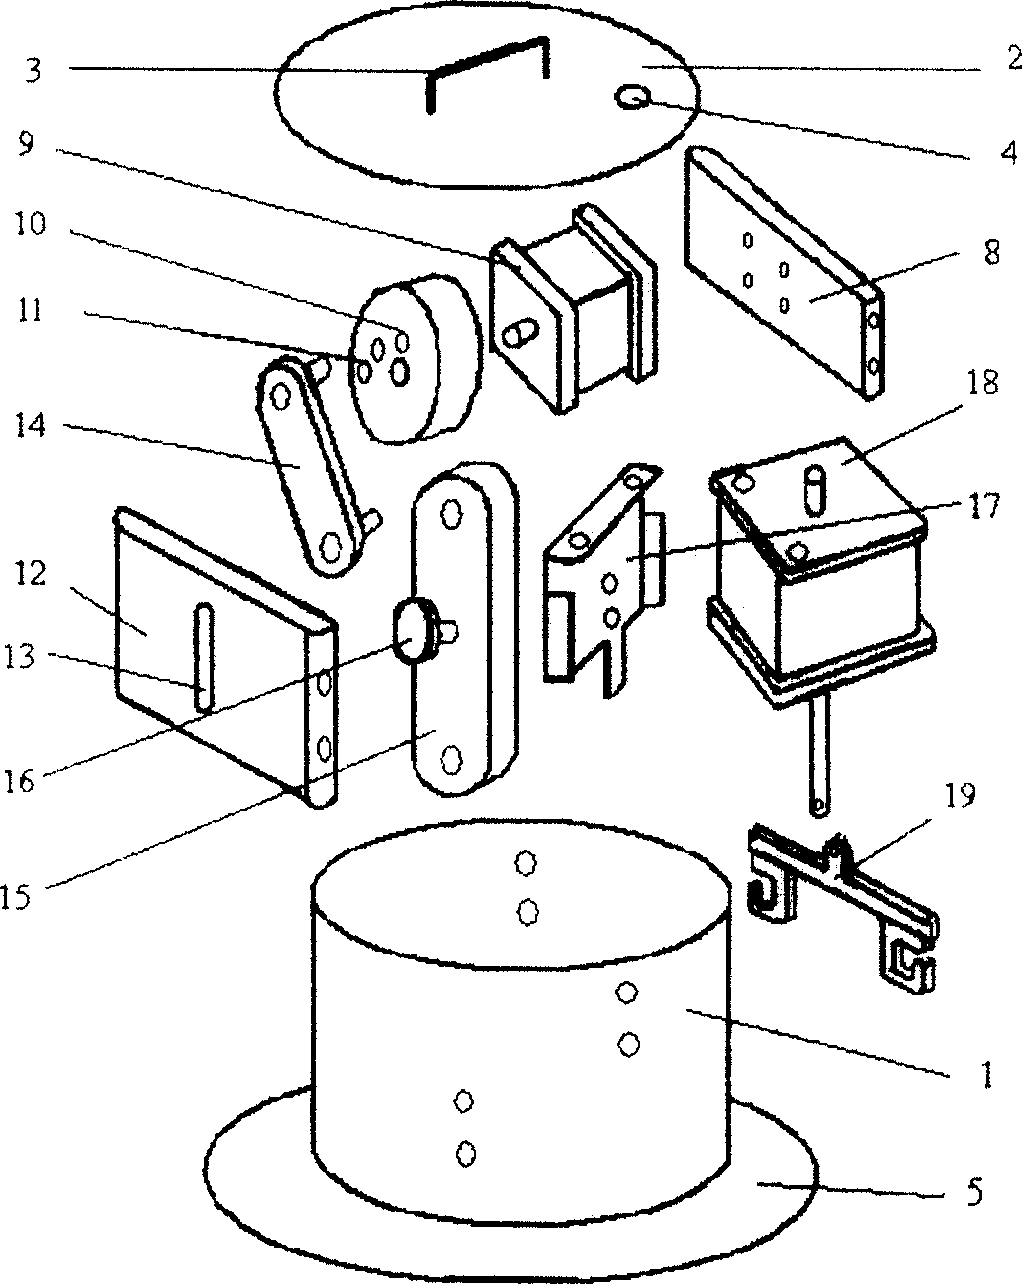 A chip washing device